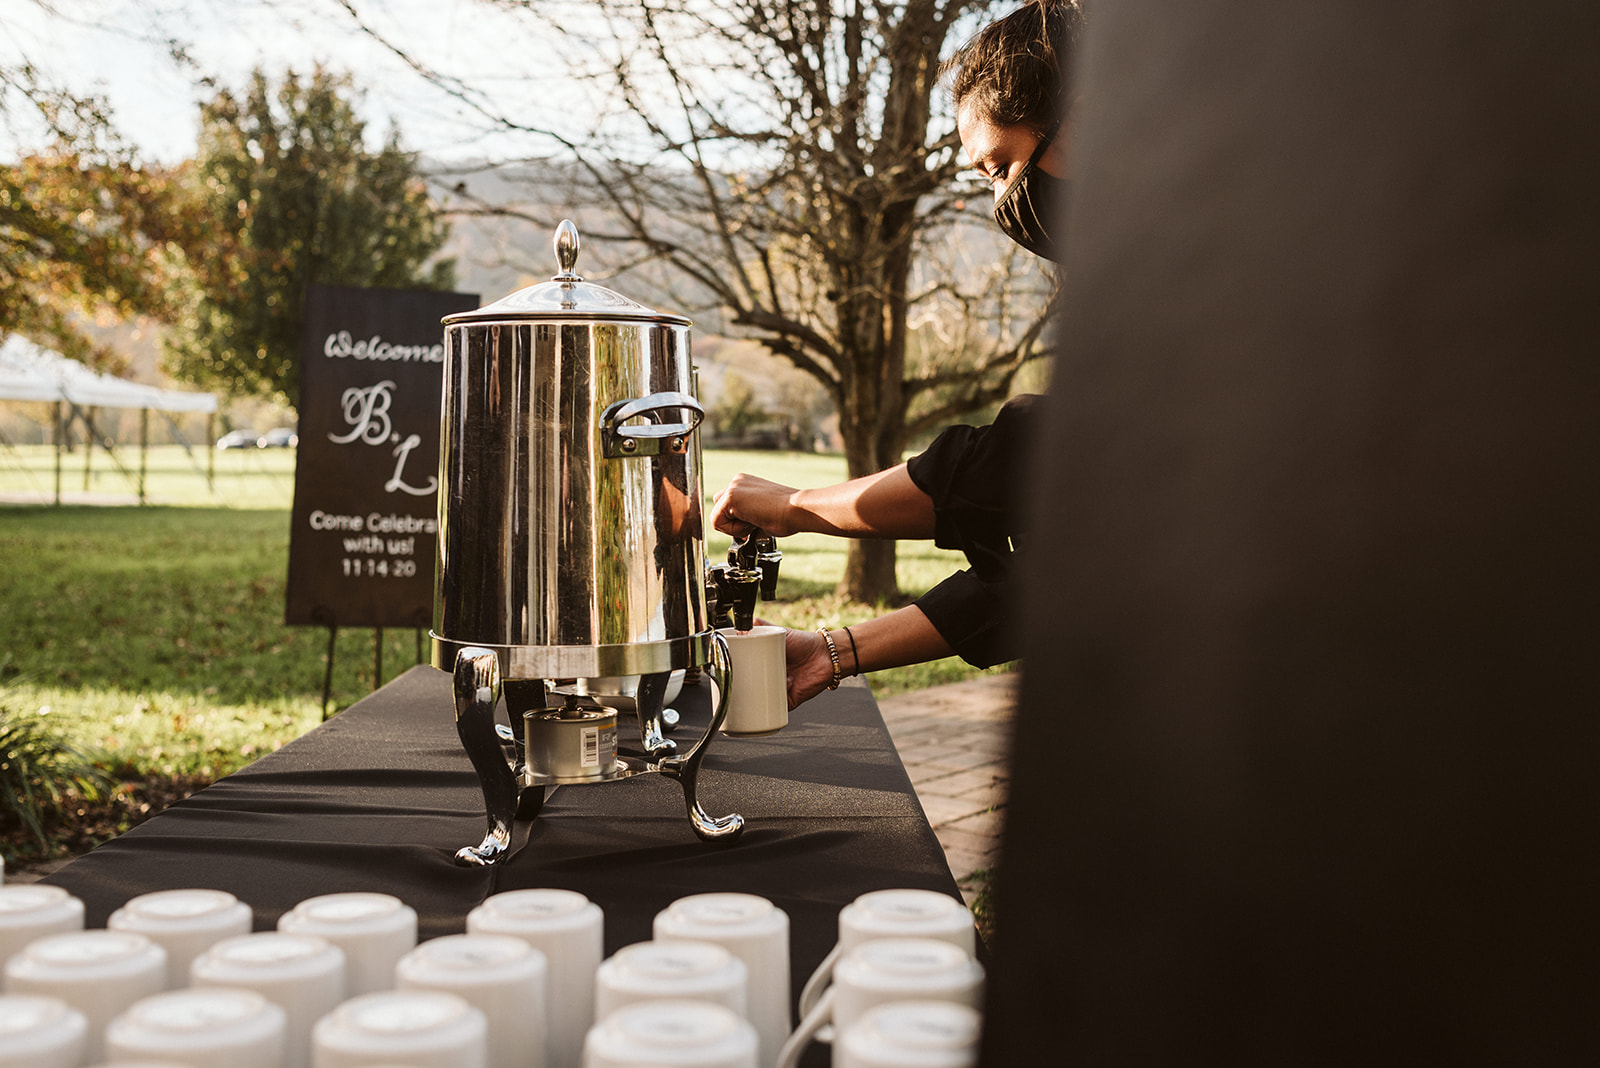 Close up of the coffee dispenser for the wedding guests